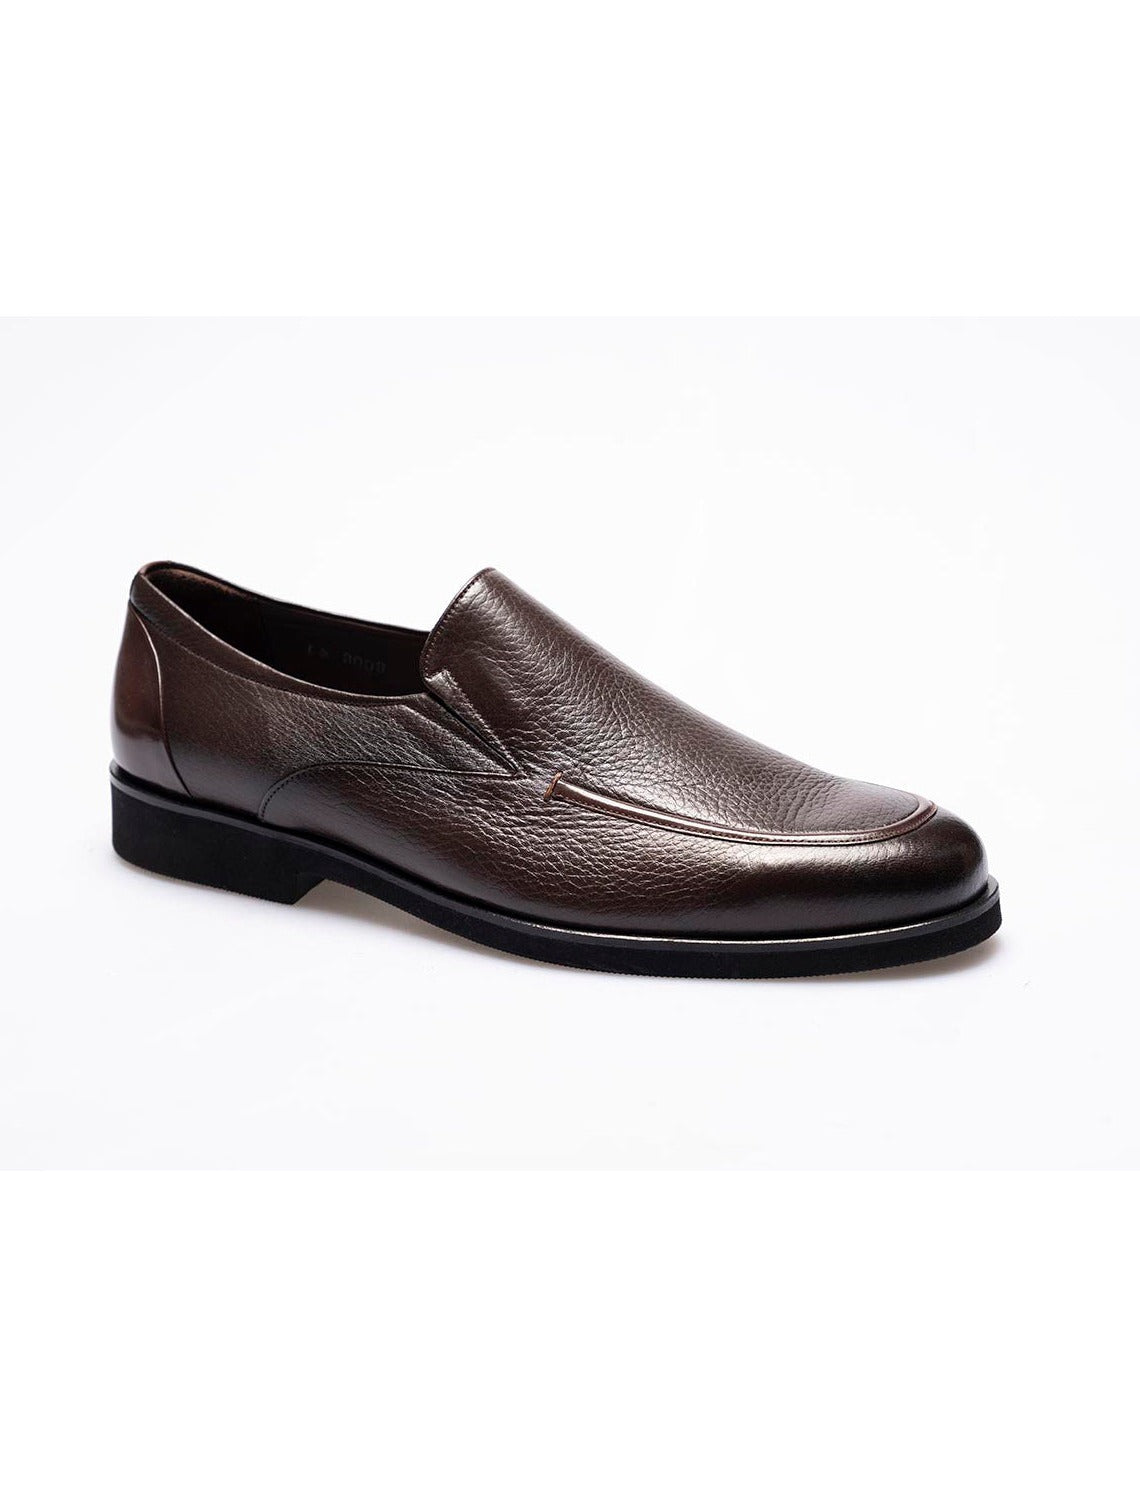 Men  Brown   Genuine Leather Classic Shoes